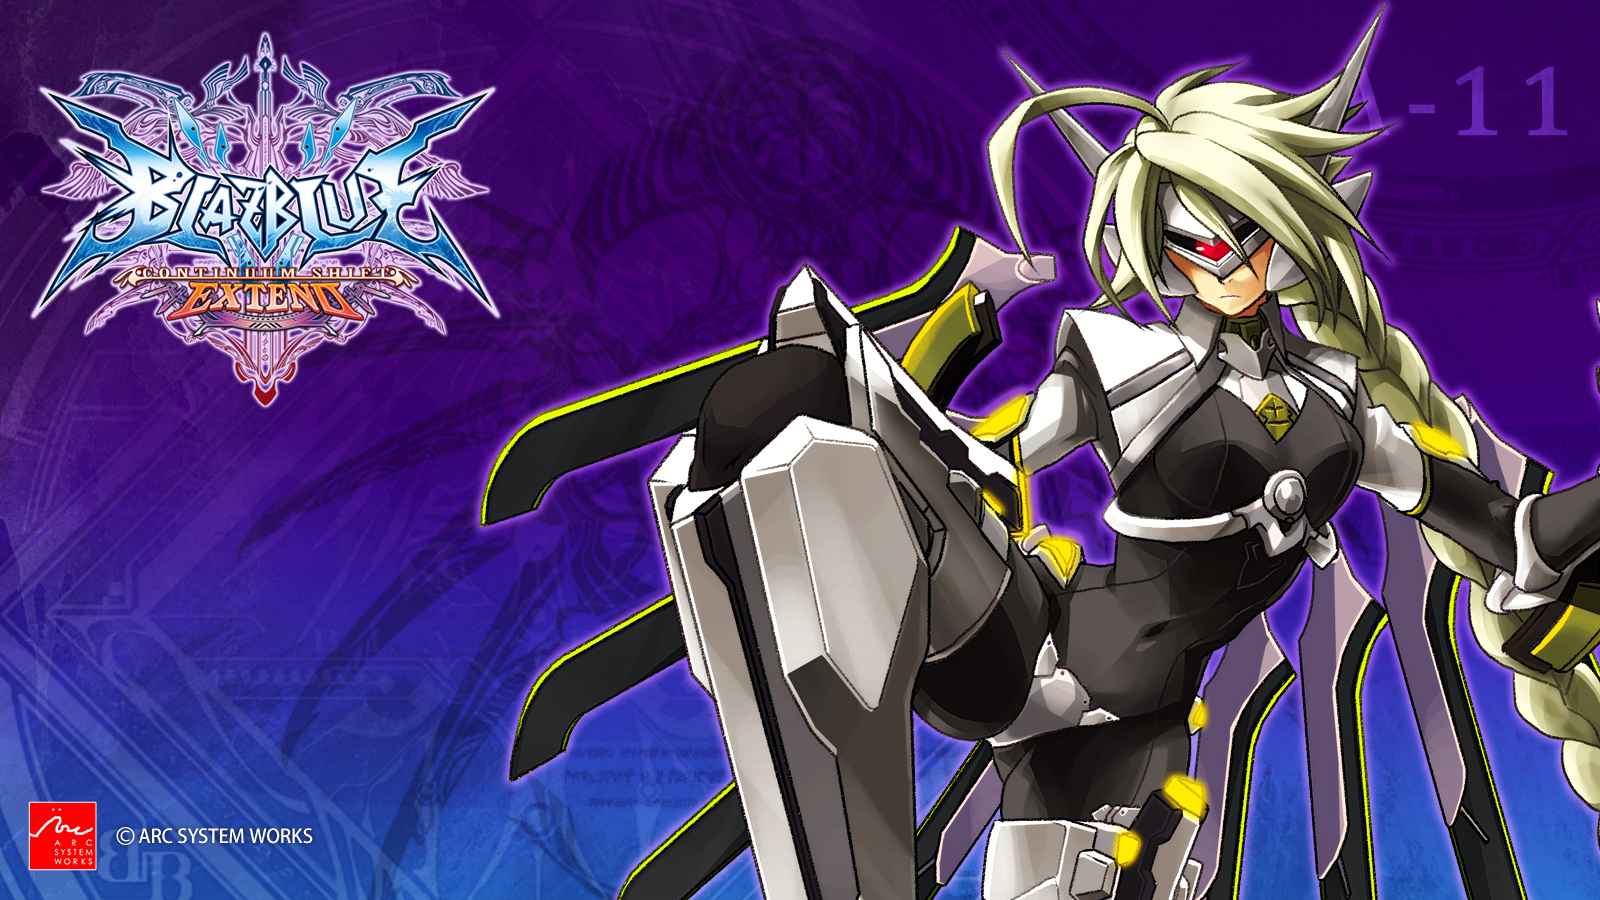 Blazblue Continuum Shift Extend Wallpaper 033 L 11 Wallpapers Ethereal Games